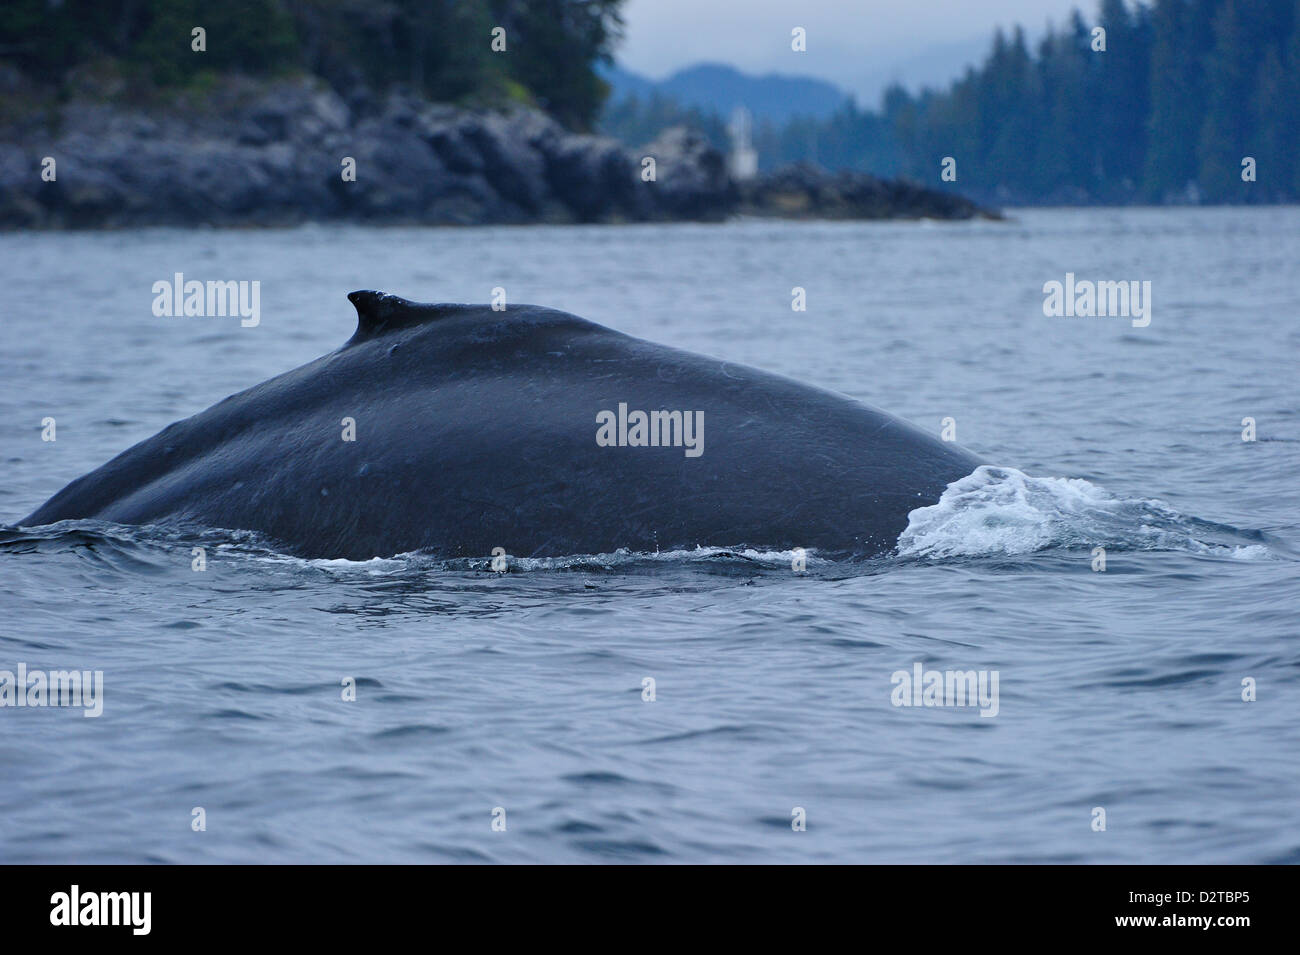 Humpback whale dives in the Pacific, Great Bear Rainforest, British Columbia, Canada, North America Stock Photo